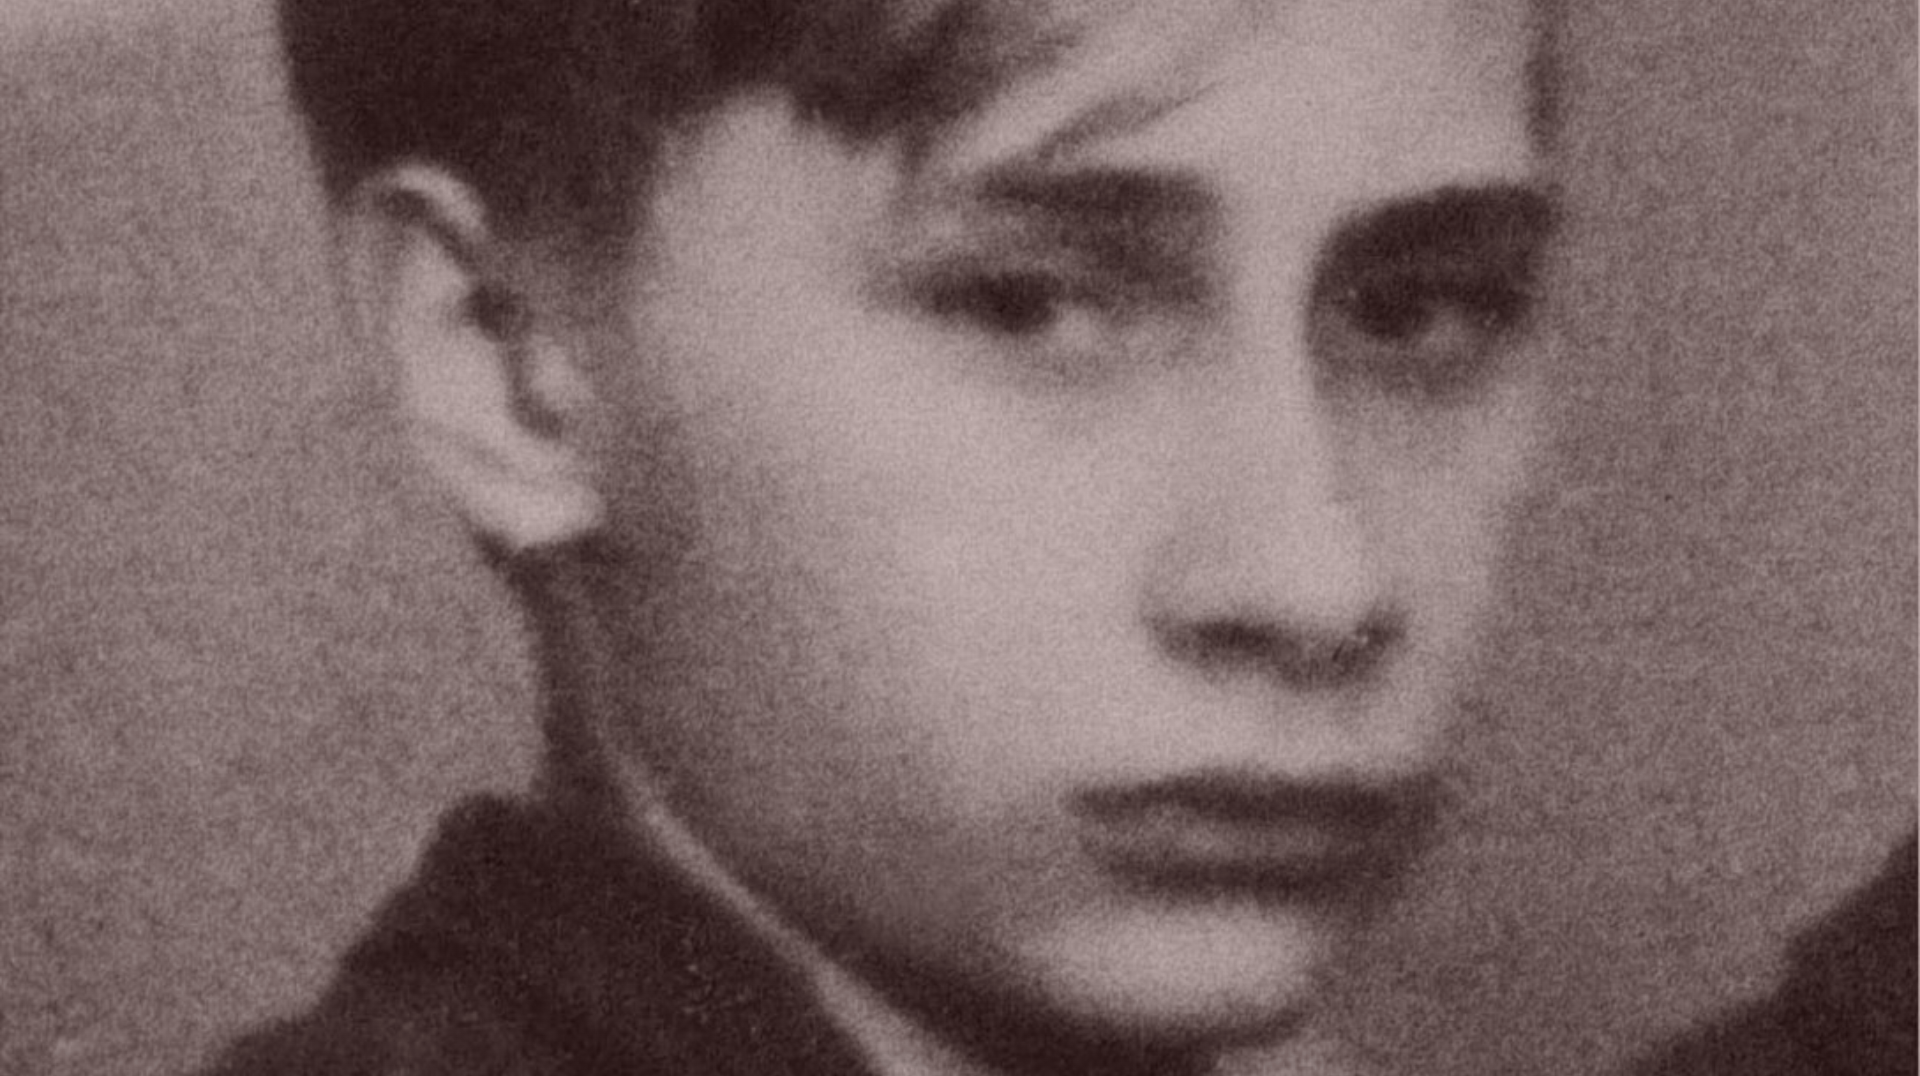 About a Boy: The Roots of Putin’s Evil